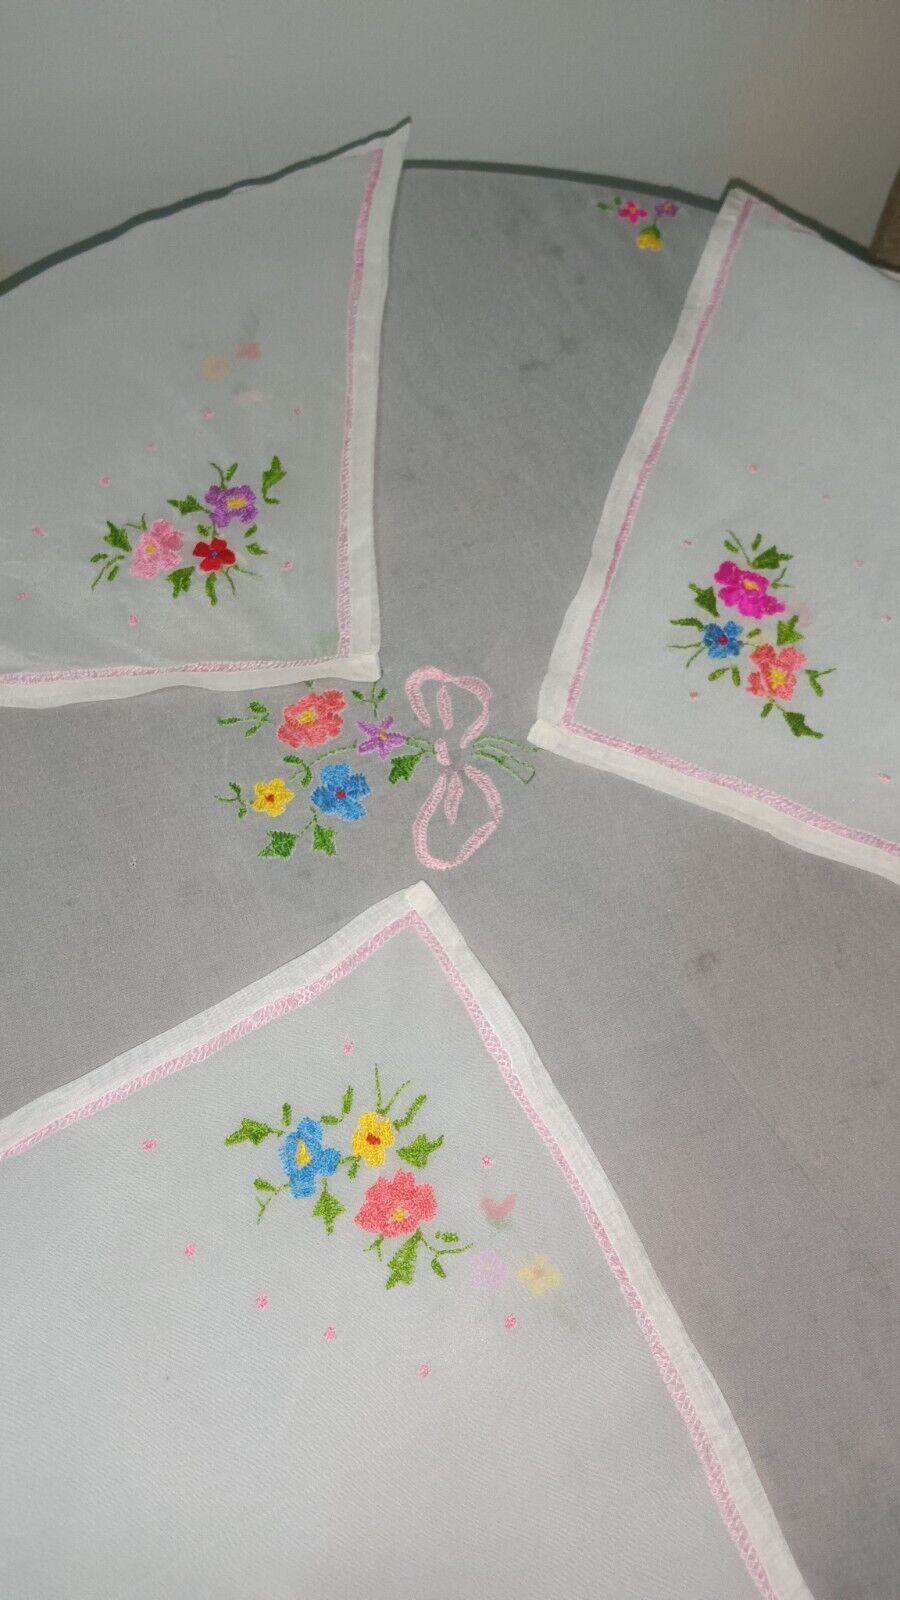 EMBROIDERY SILK FLORAL SQUARE TABLECLOTH & 3 NAPKINS HANDMADE 30 X 30 VINTAGE